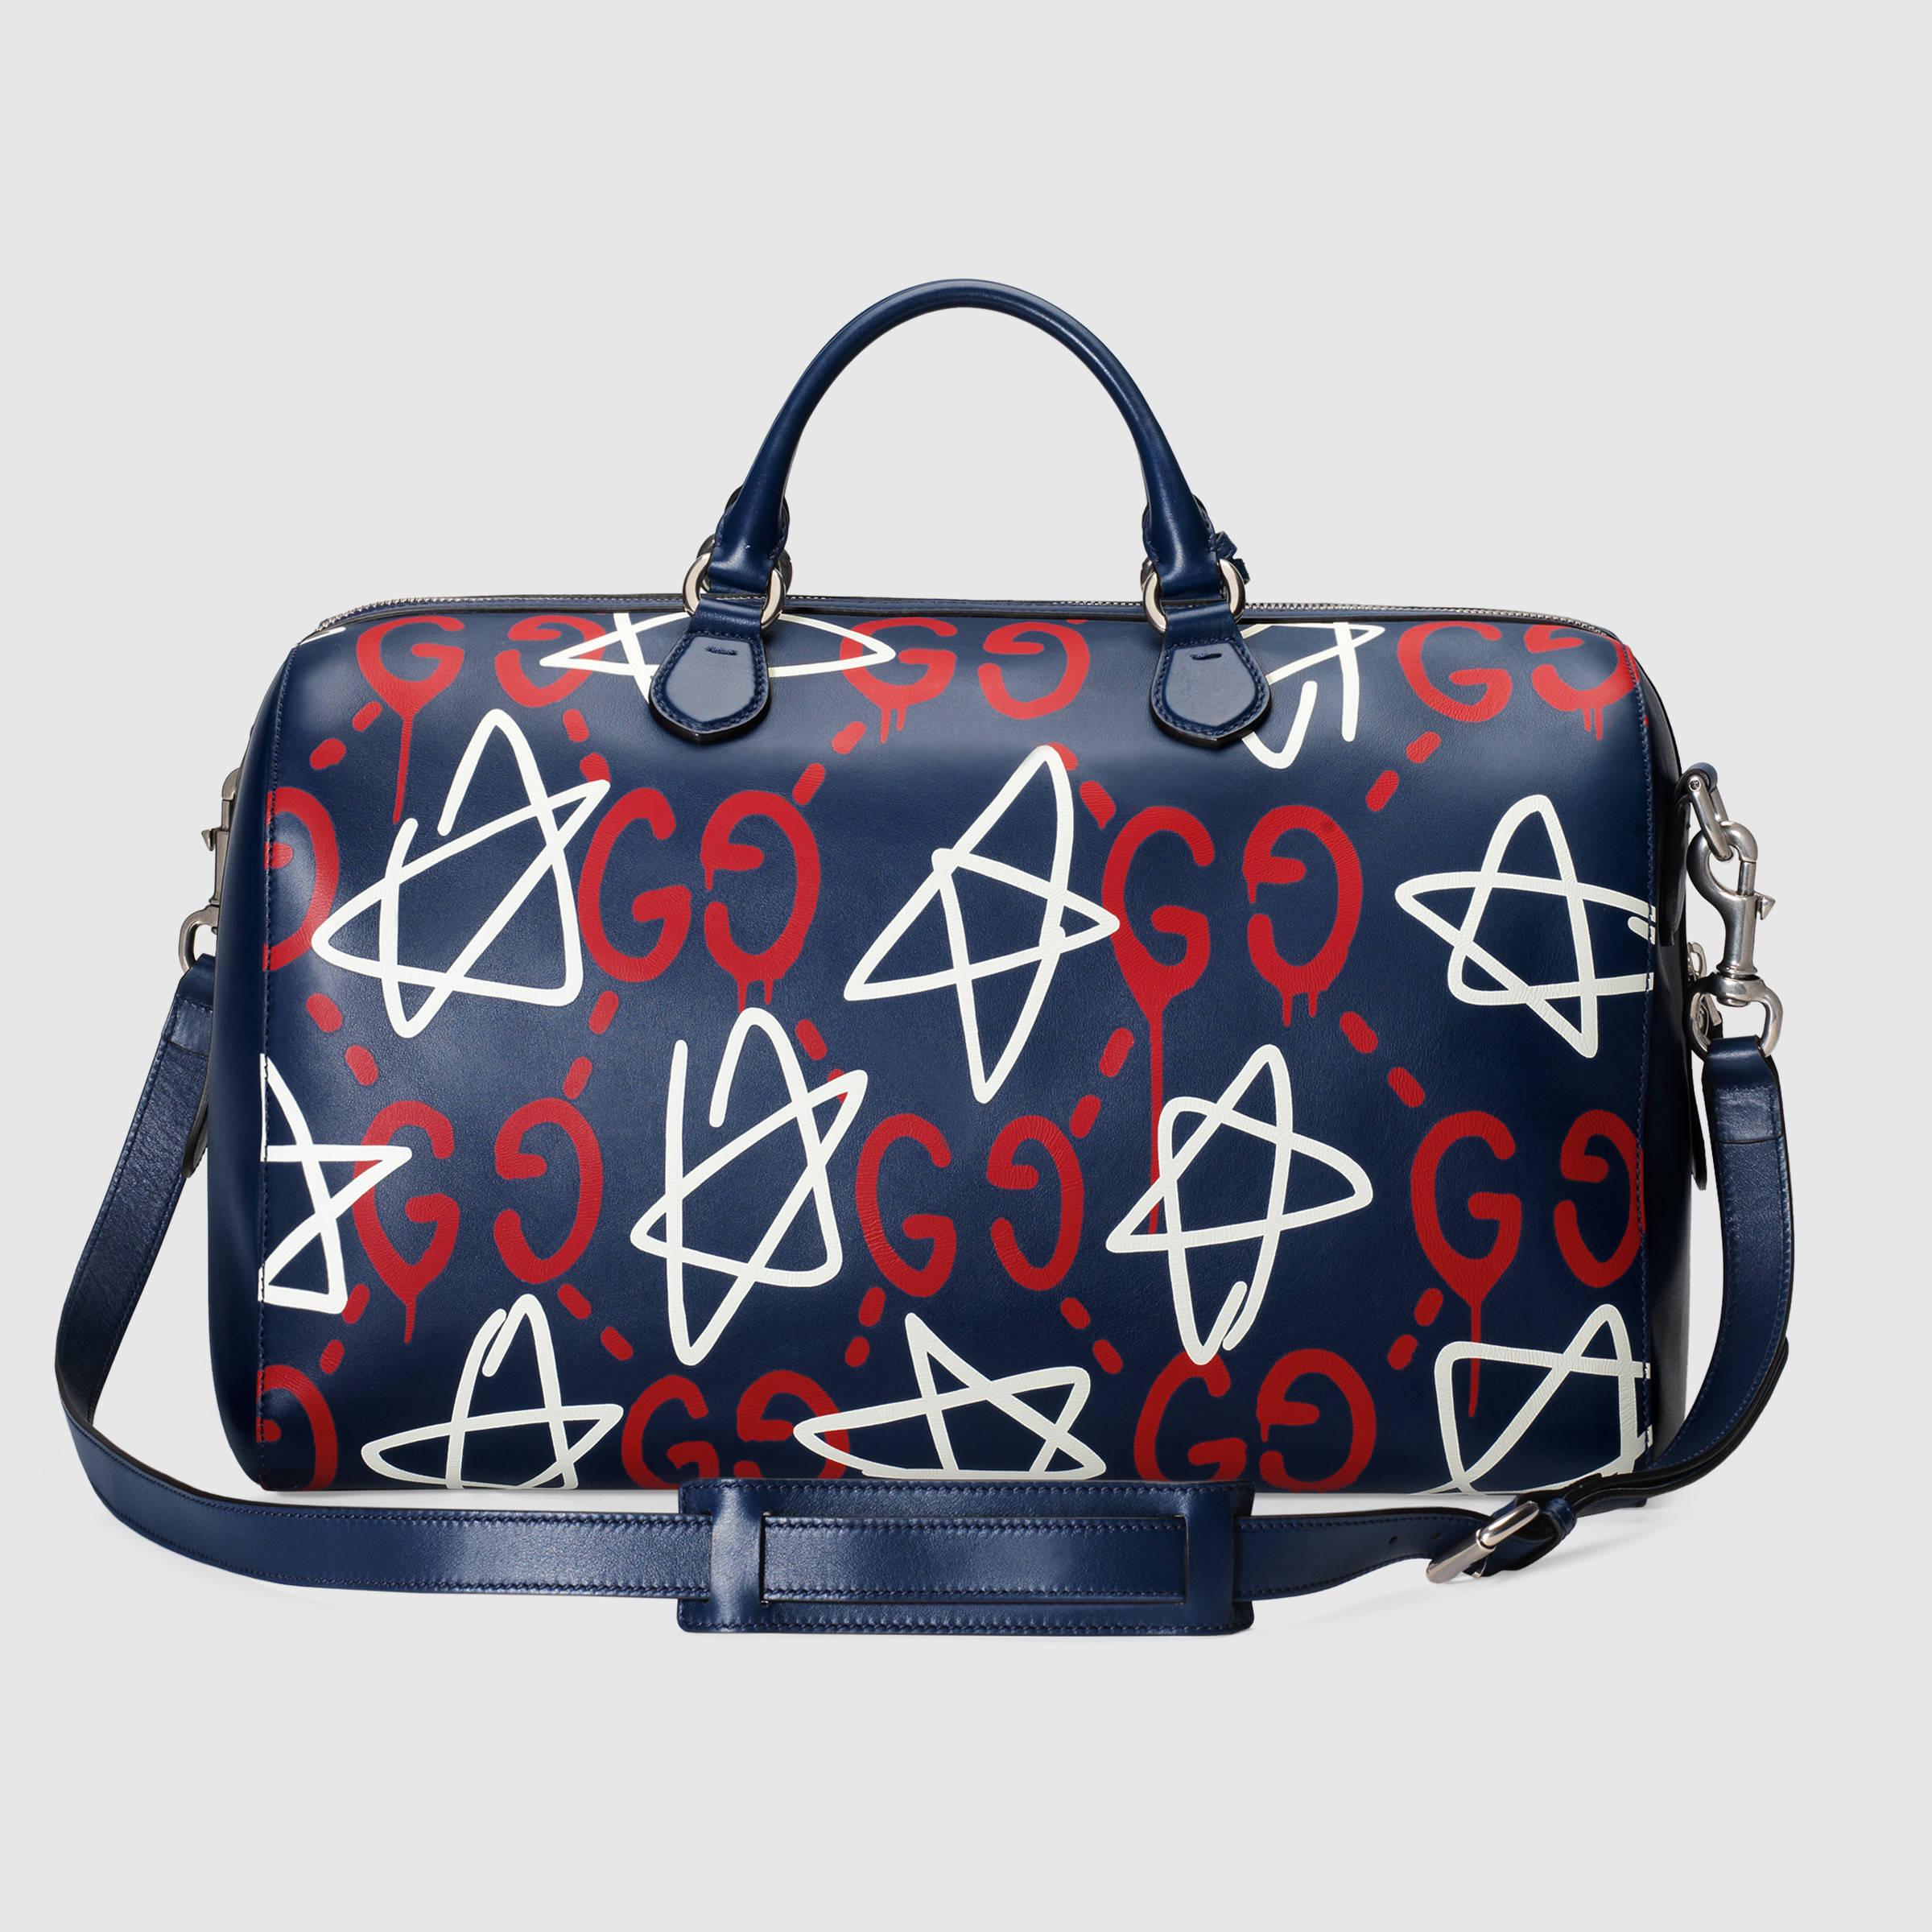 gucci ghost duffle